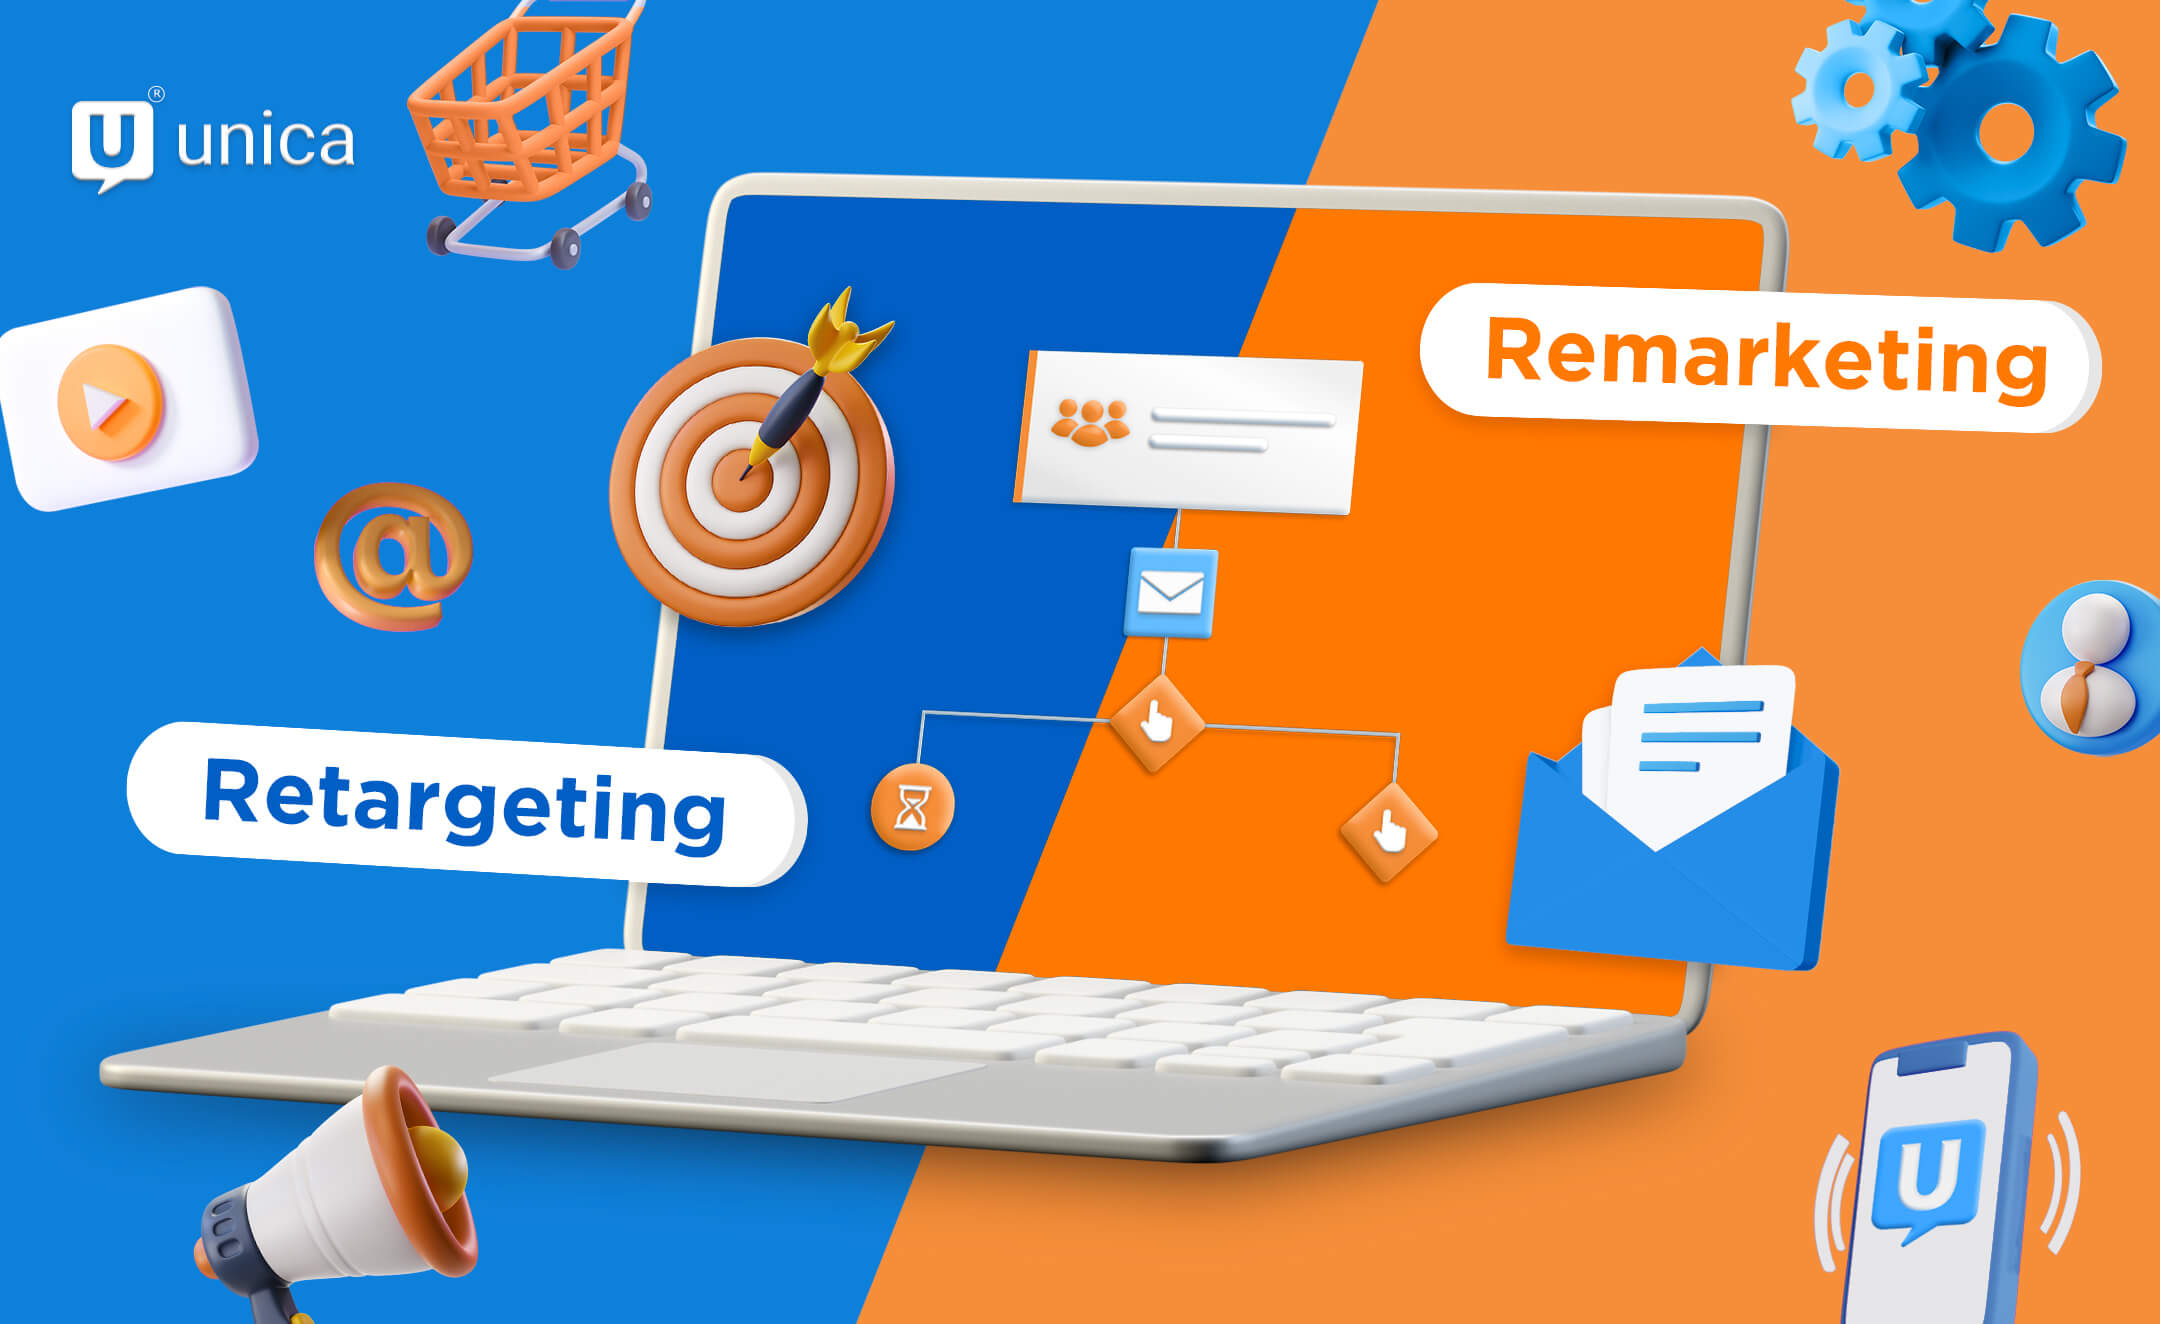 Retargeting | digital advertising agency singapore | search engine marketing for small businesses in mumbai | digital marketing agency | search engine marketing for local business in mumbai